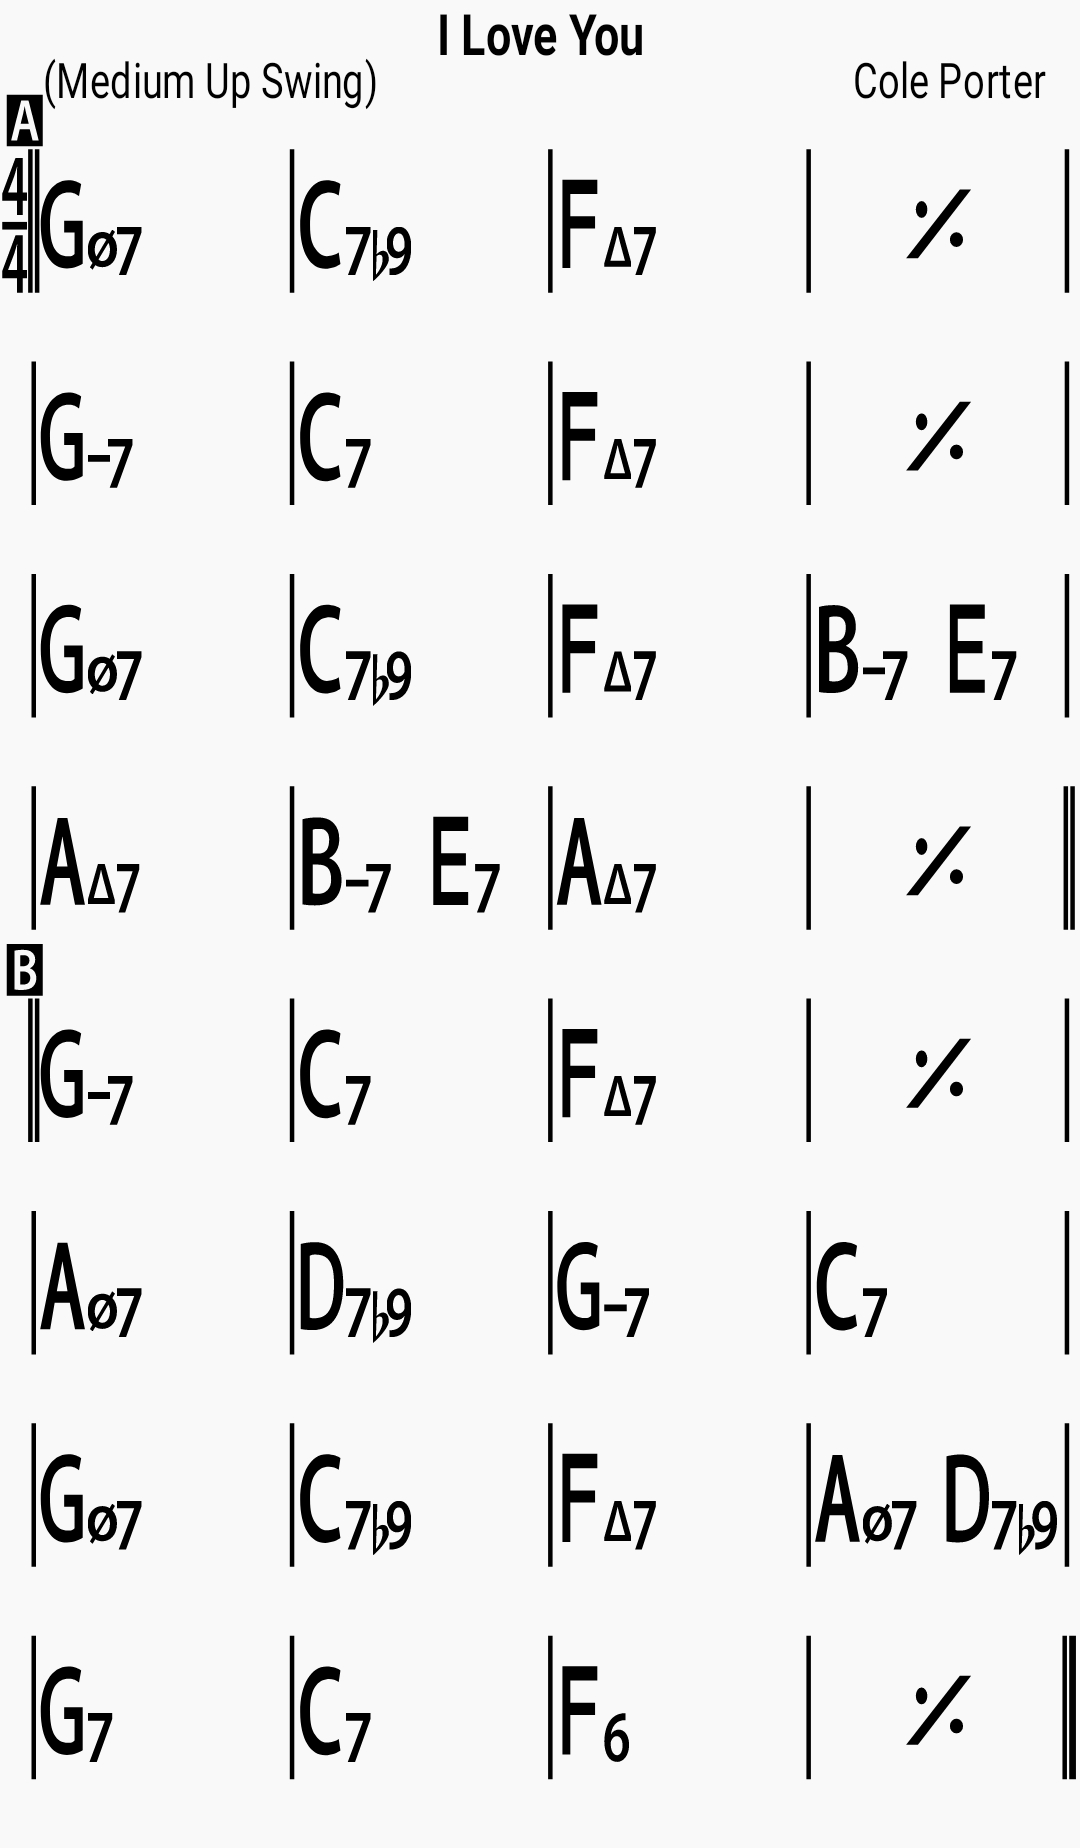 Chord chart for the jazz standard I Love You